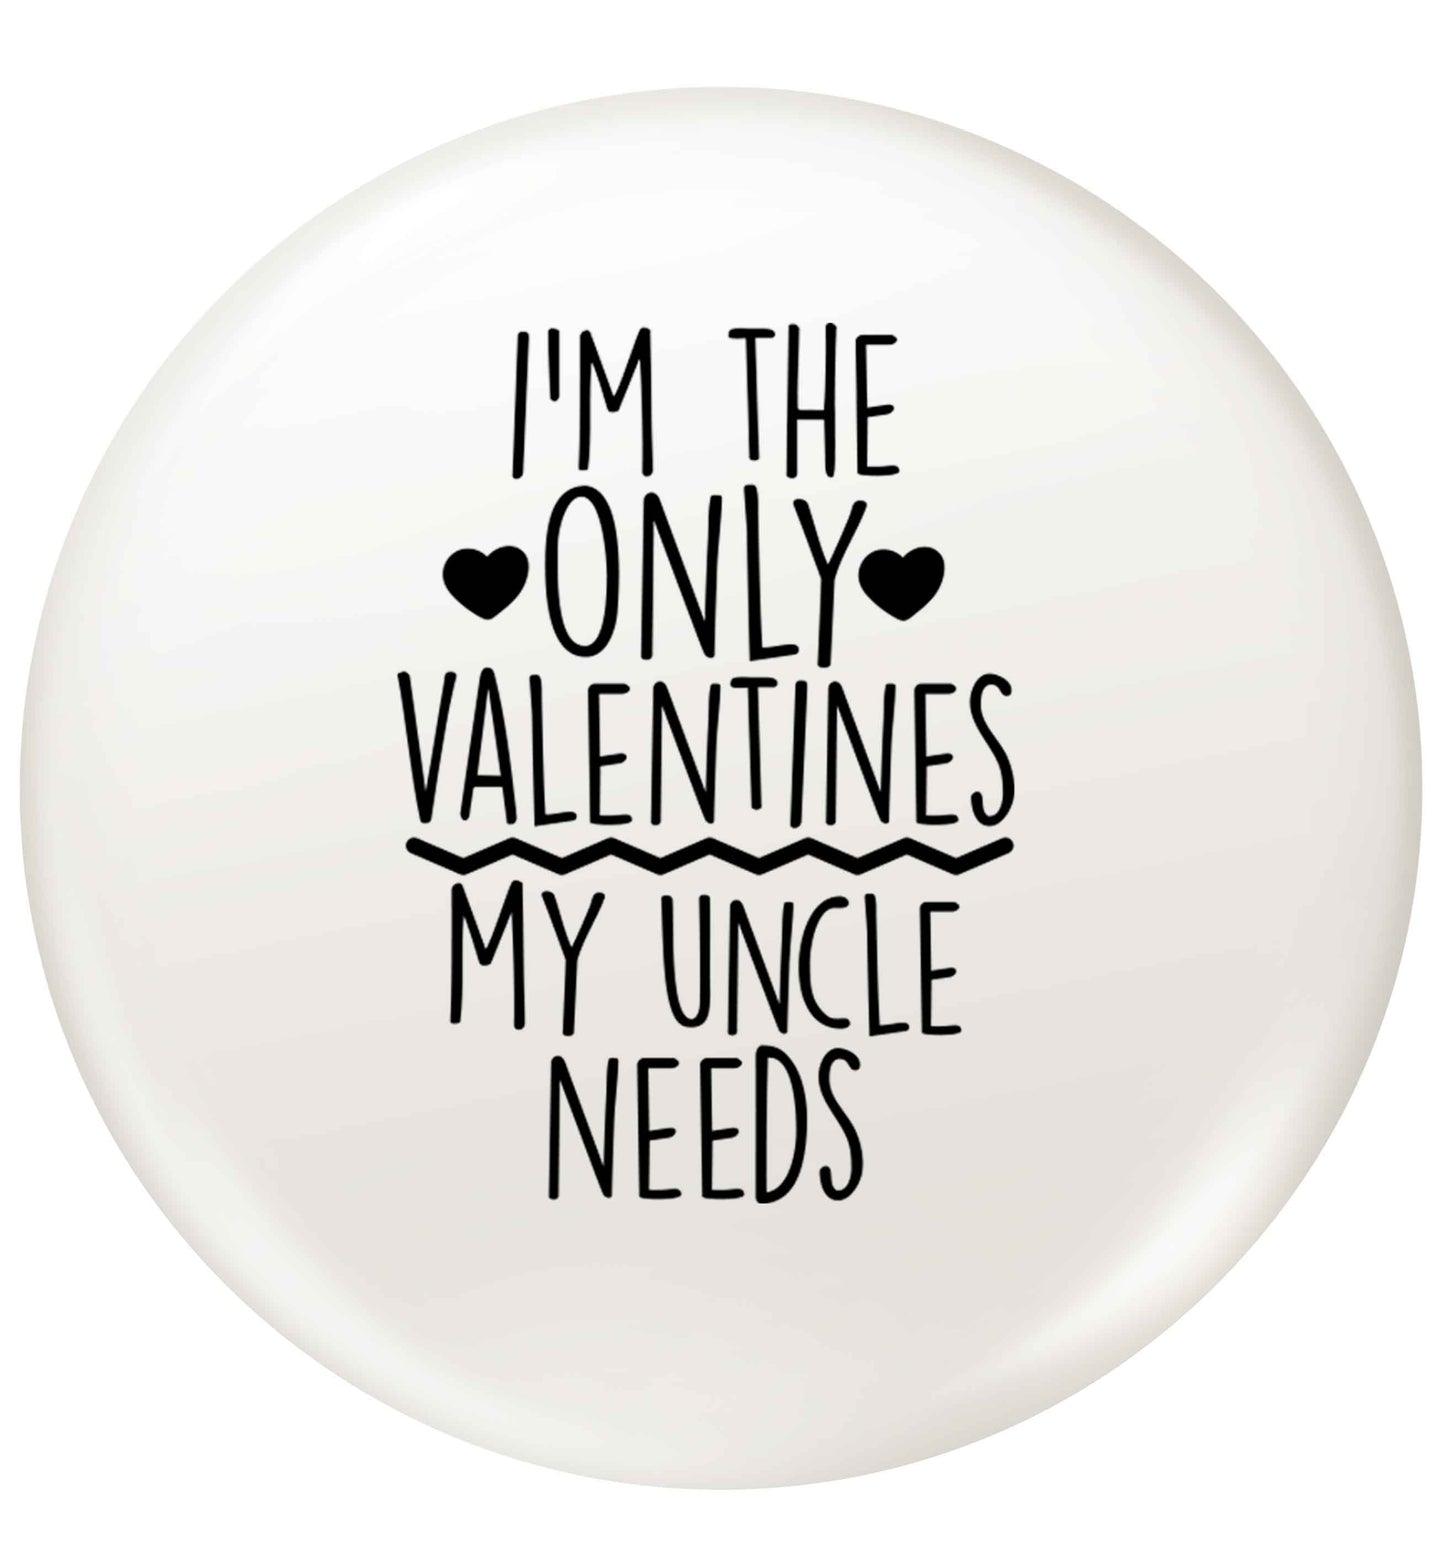 I'm the only valentines my uncle needs small 25mm Pin badge